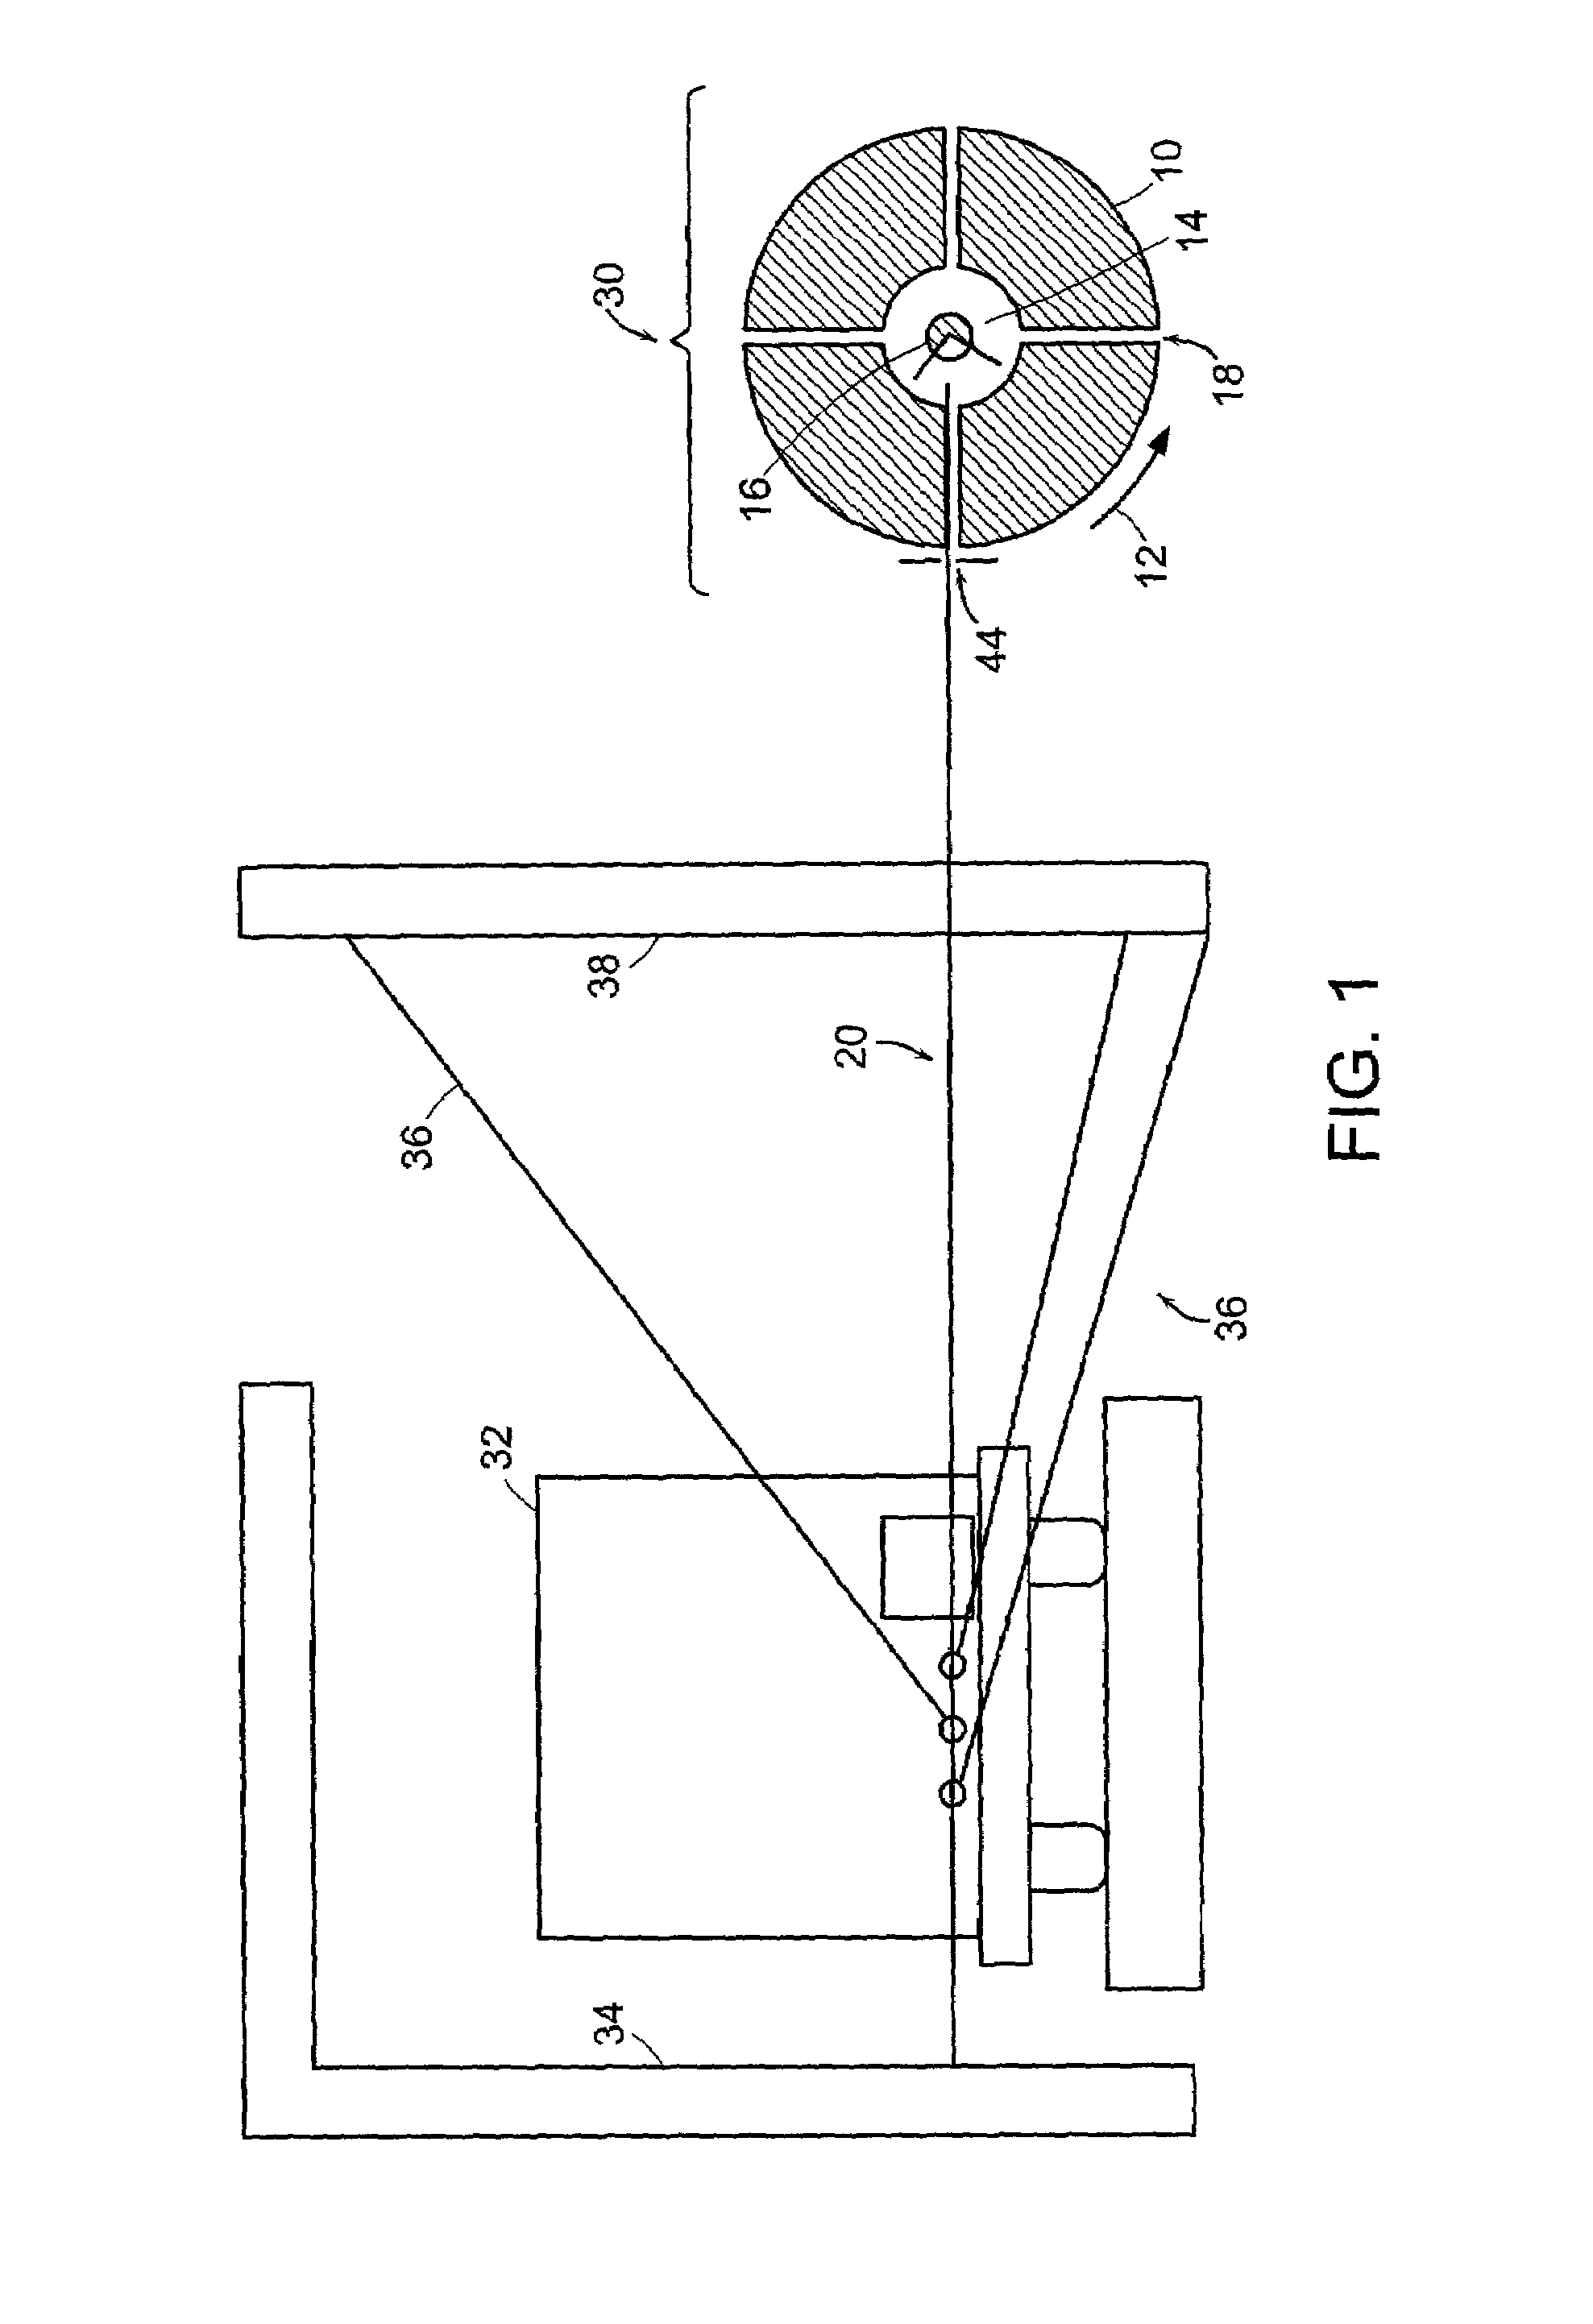 X-ray inspection using spatially and spectrally tailored beams